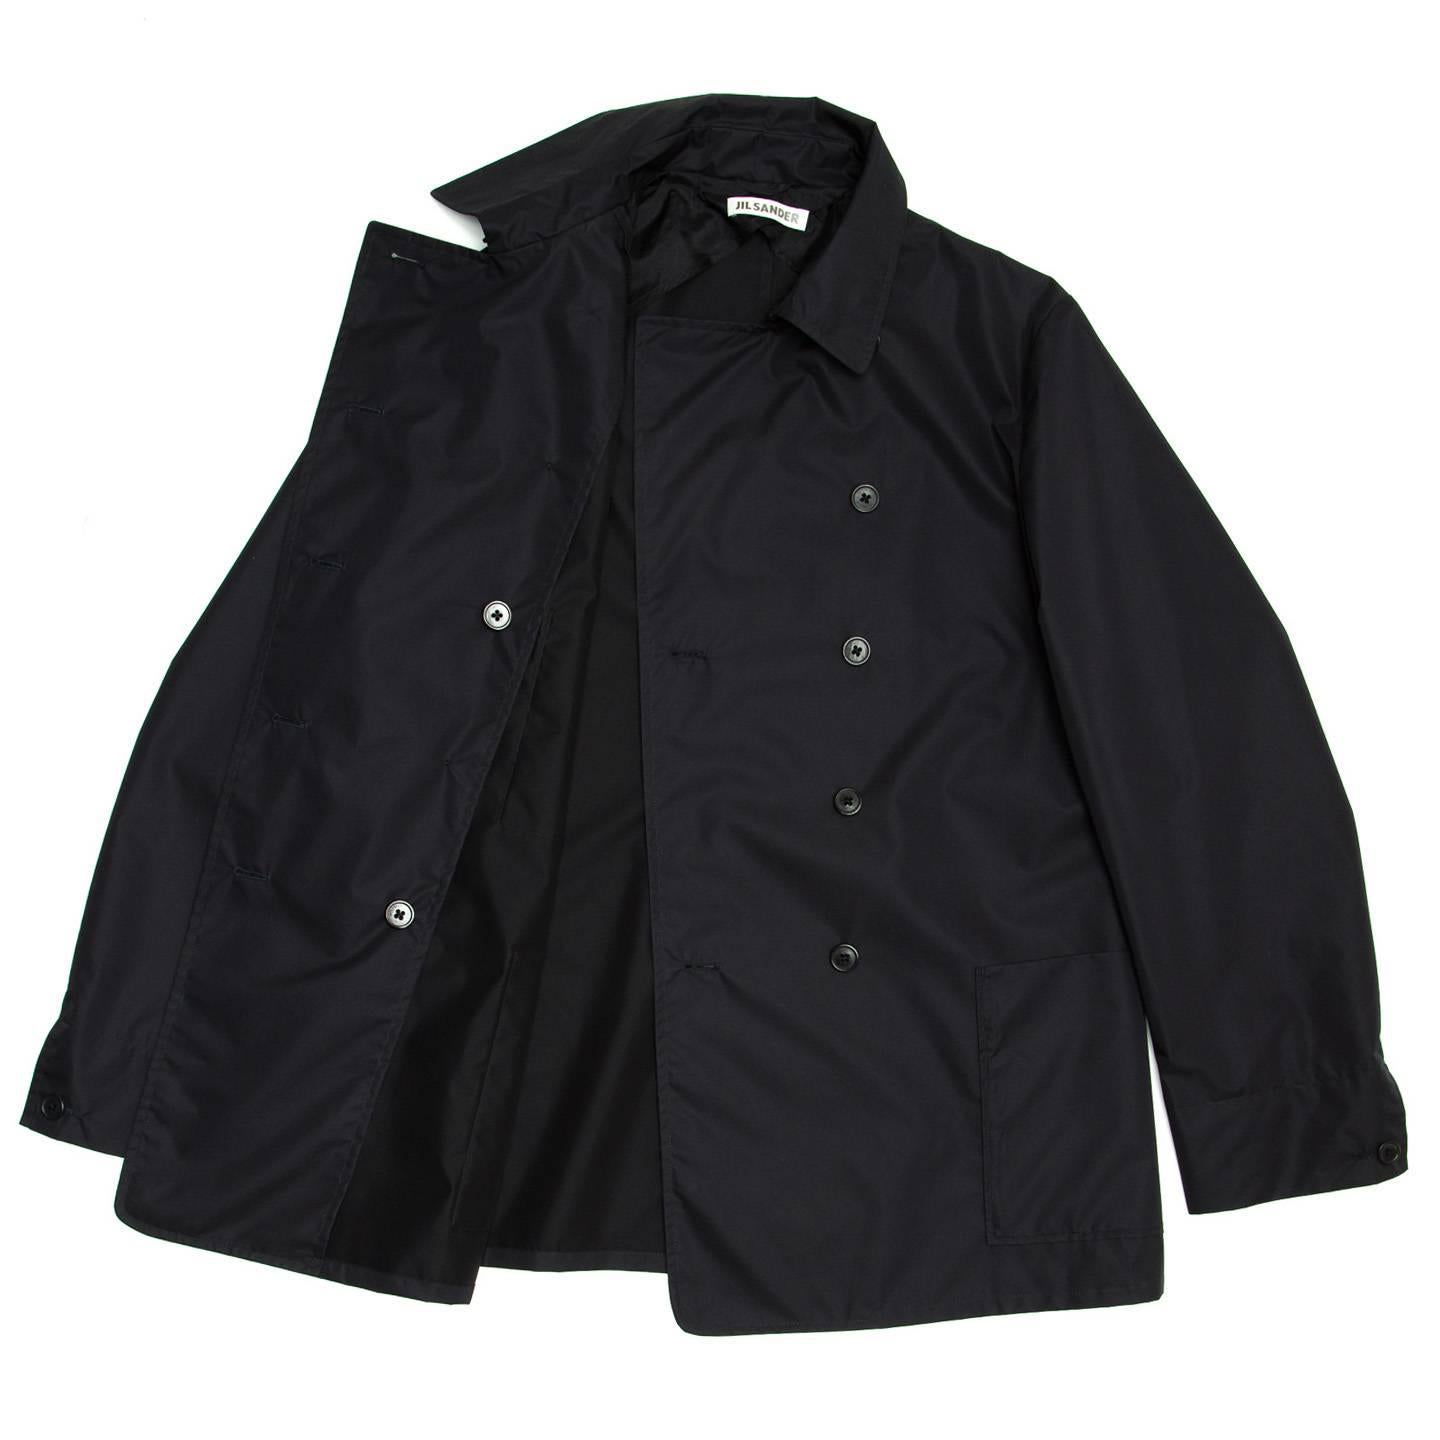 Jil Sander Navy Double Breasted Raincoat In New Condition For Sale In Brooklyn, NY